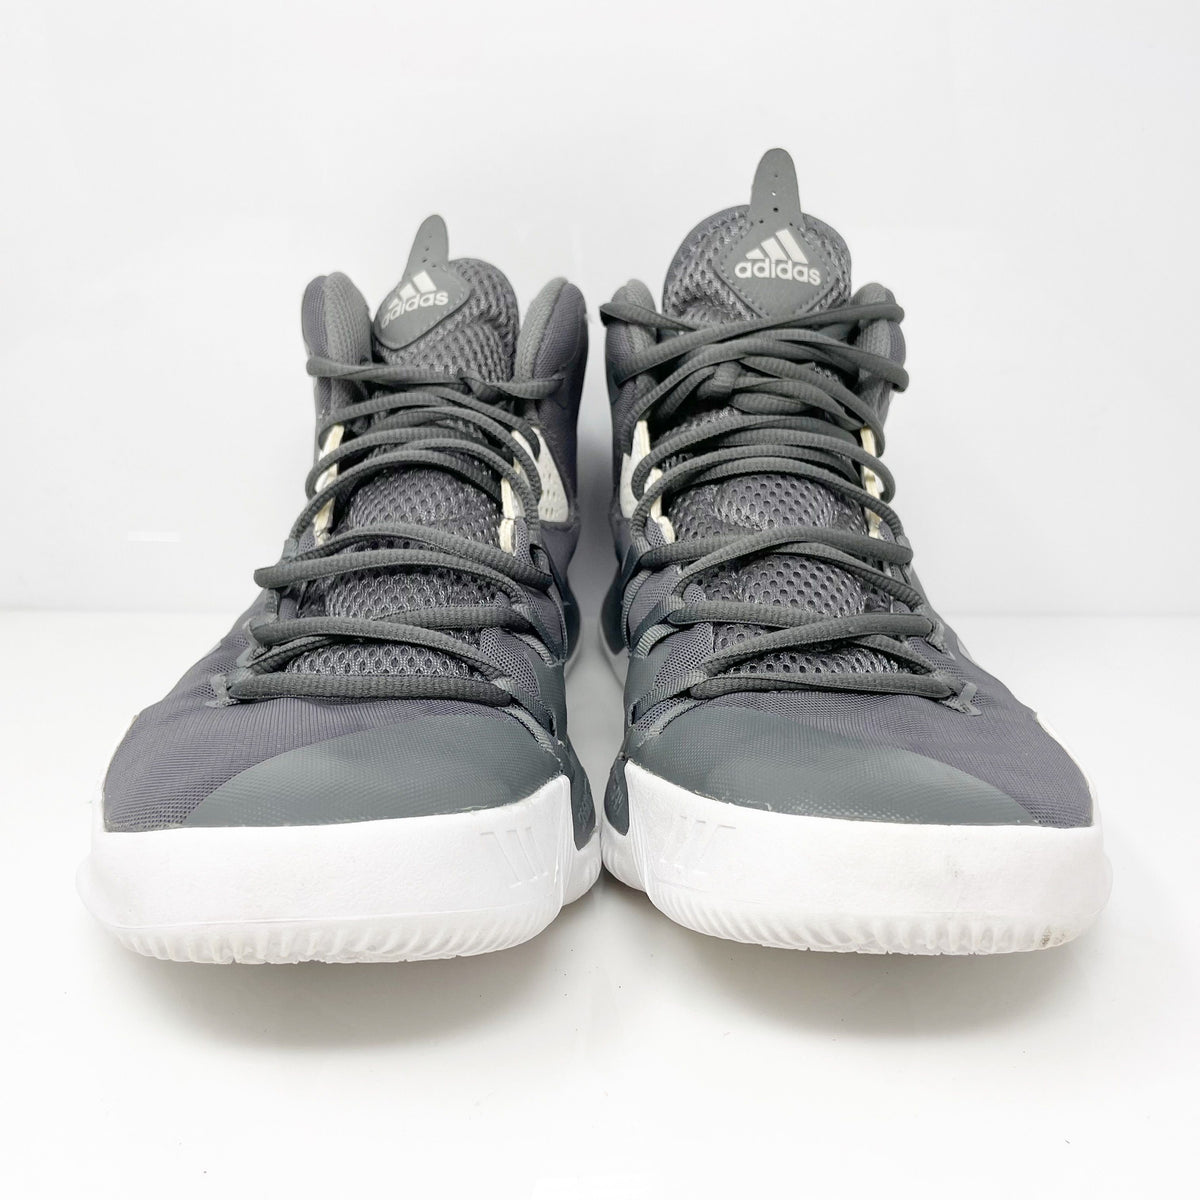 Adidas Mens Dual Threat 2017 BY4179 Gray Basketball Shoes Sneakers Siz ...